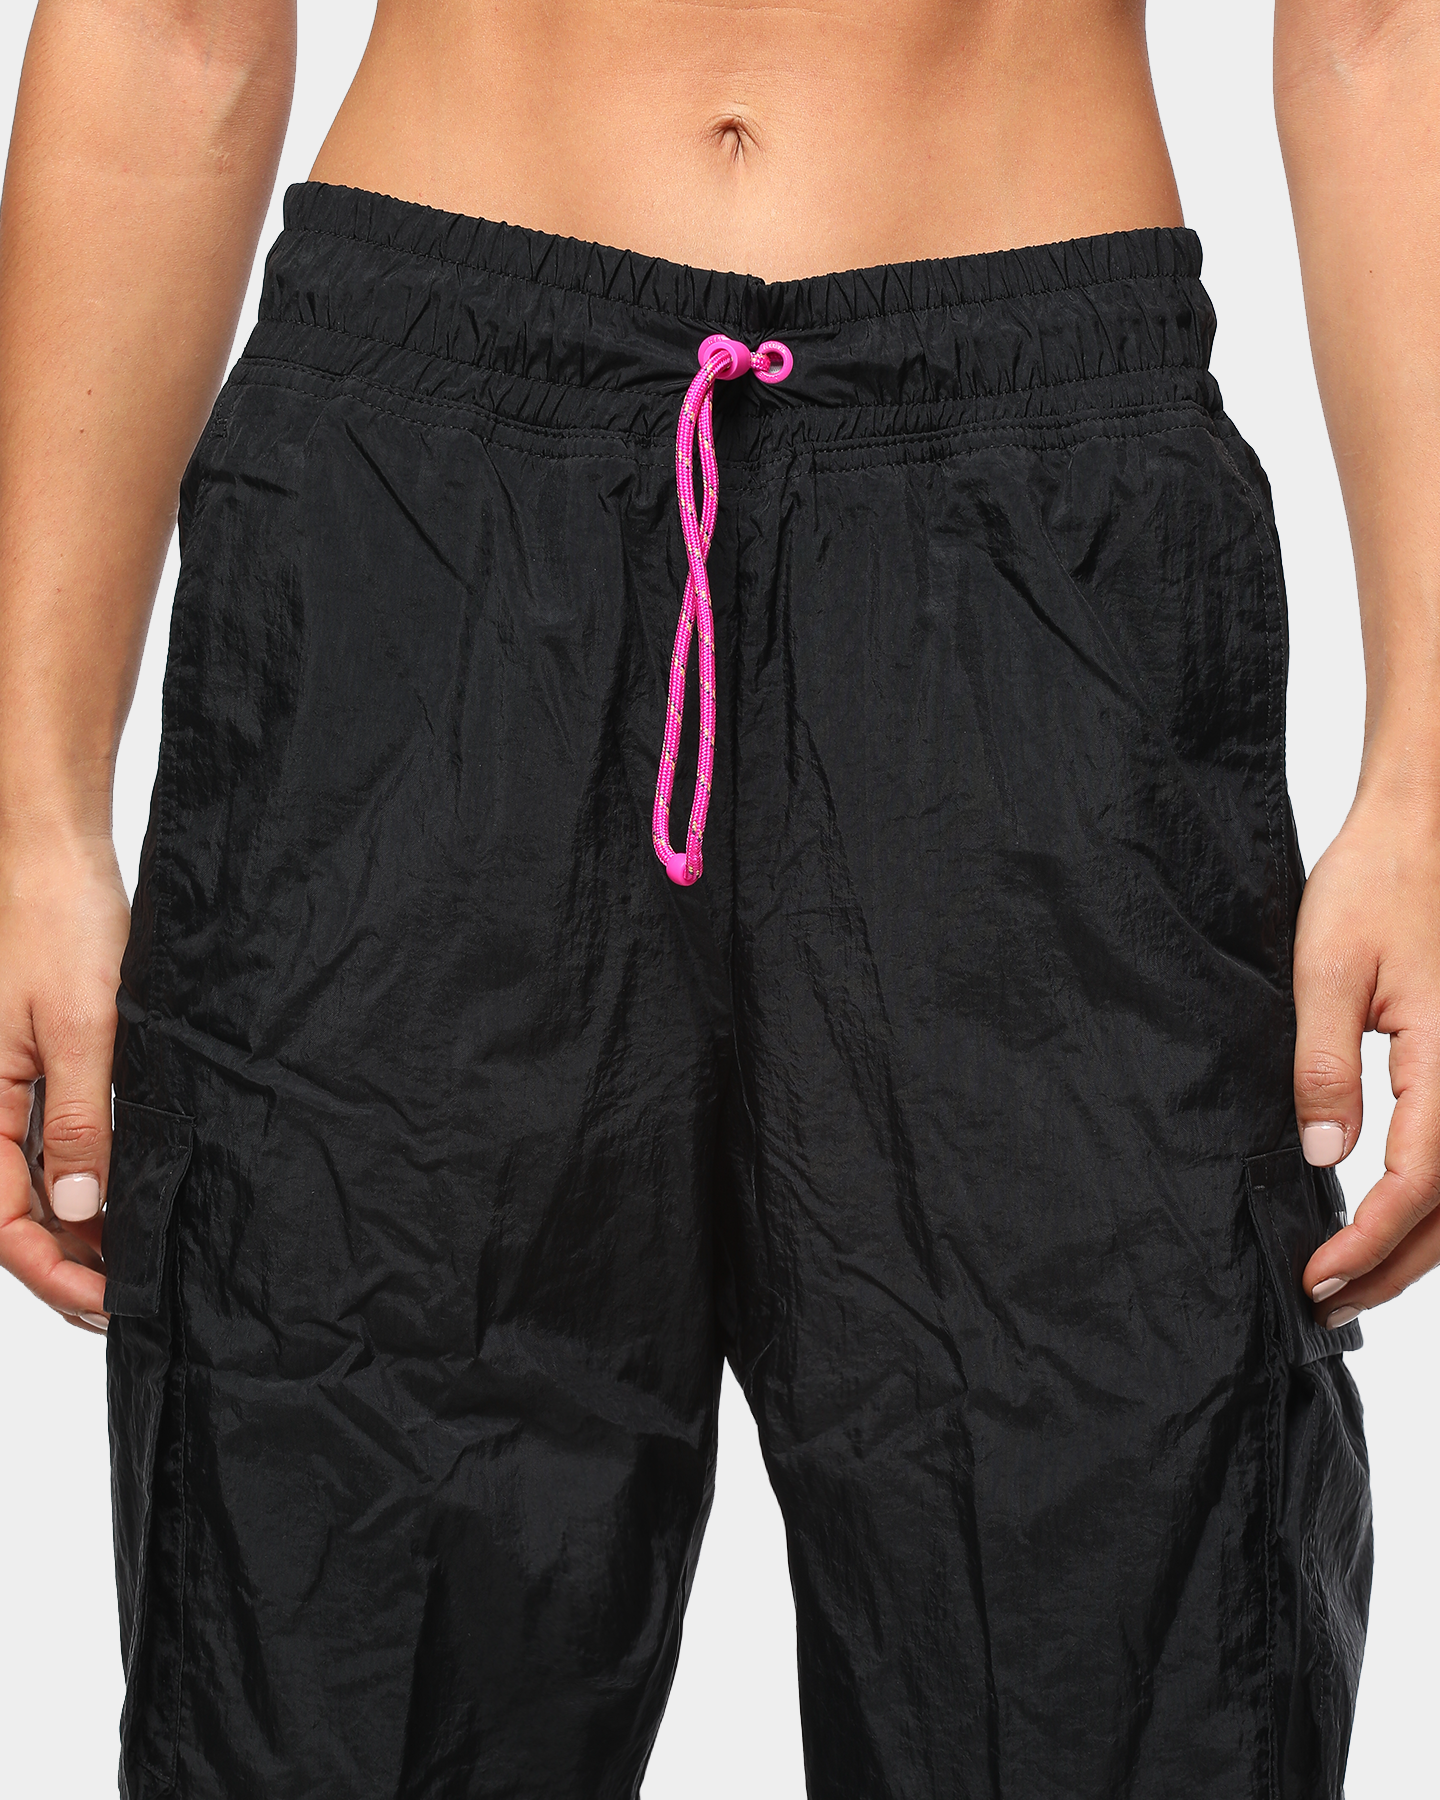 nsw icon clash pant in black